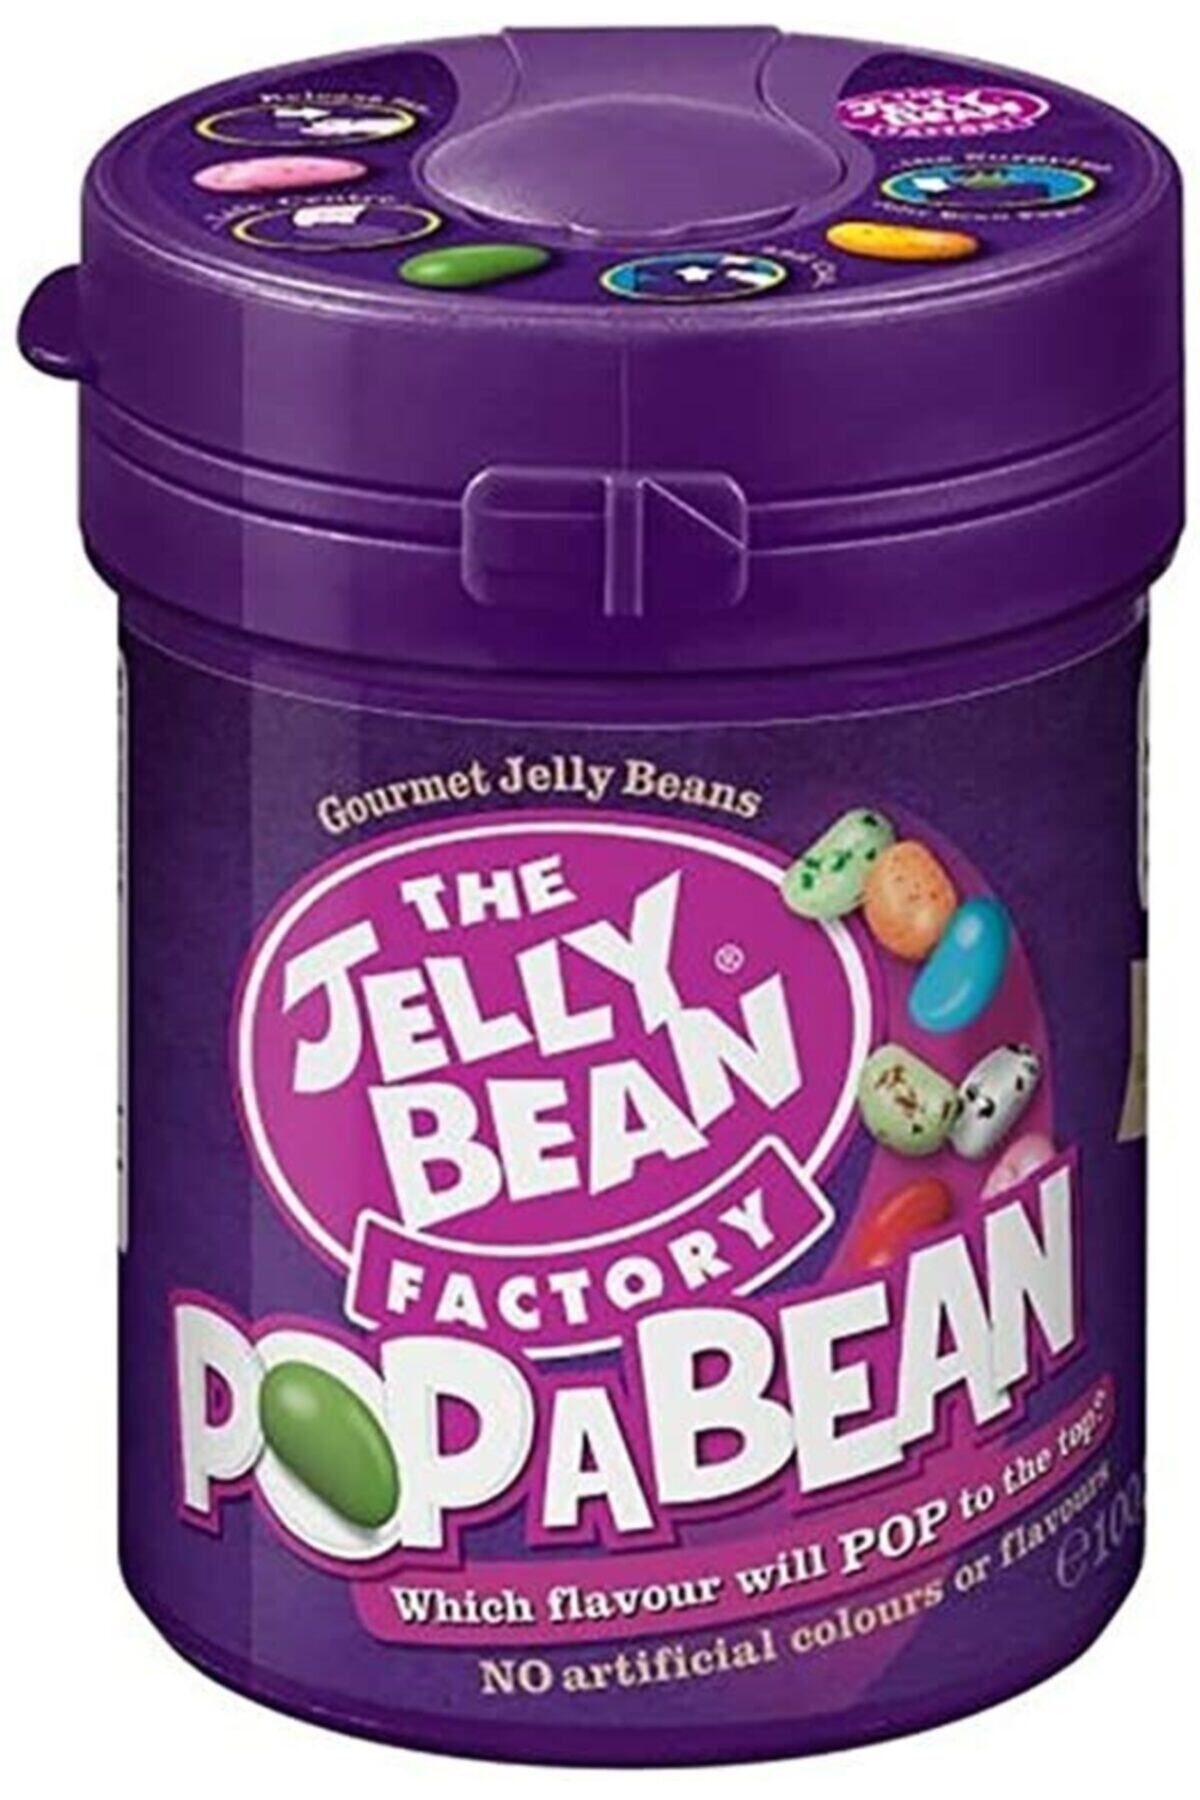 Jelly bean leaks. The Jelly Bean Factory 36. The Jelly Bean Factory вкусы. The Jelly Bean Factory 36 вкусов. The Jelly Bean Factory 18 вкусов.